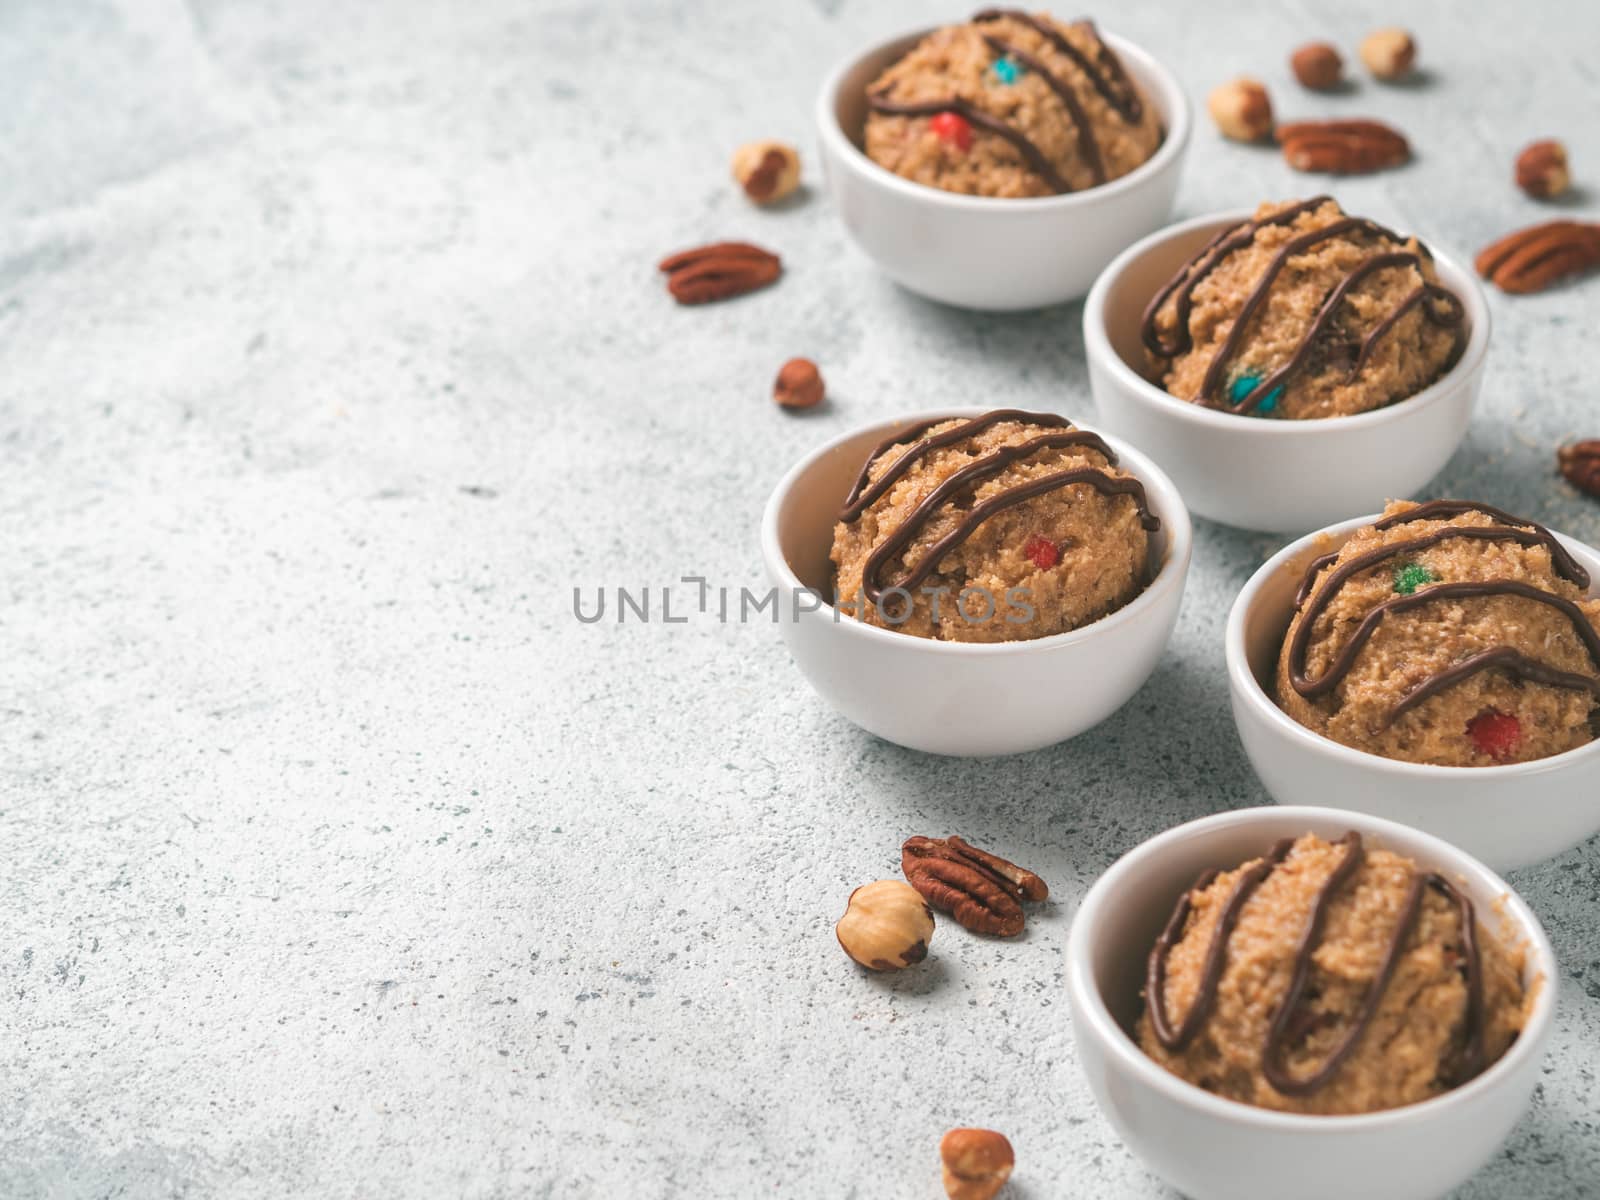 Safe-to-eat raw monster cookie dough in small portion bowl and nuts on gray cement background. Ideas and recipes for kids and toddlers meal. Copy space for text.